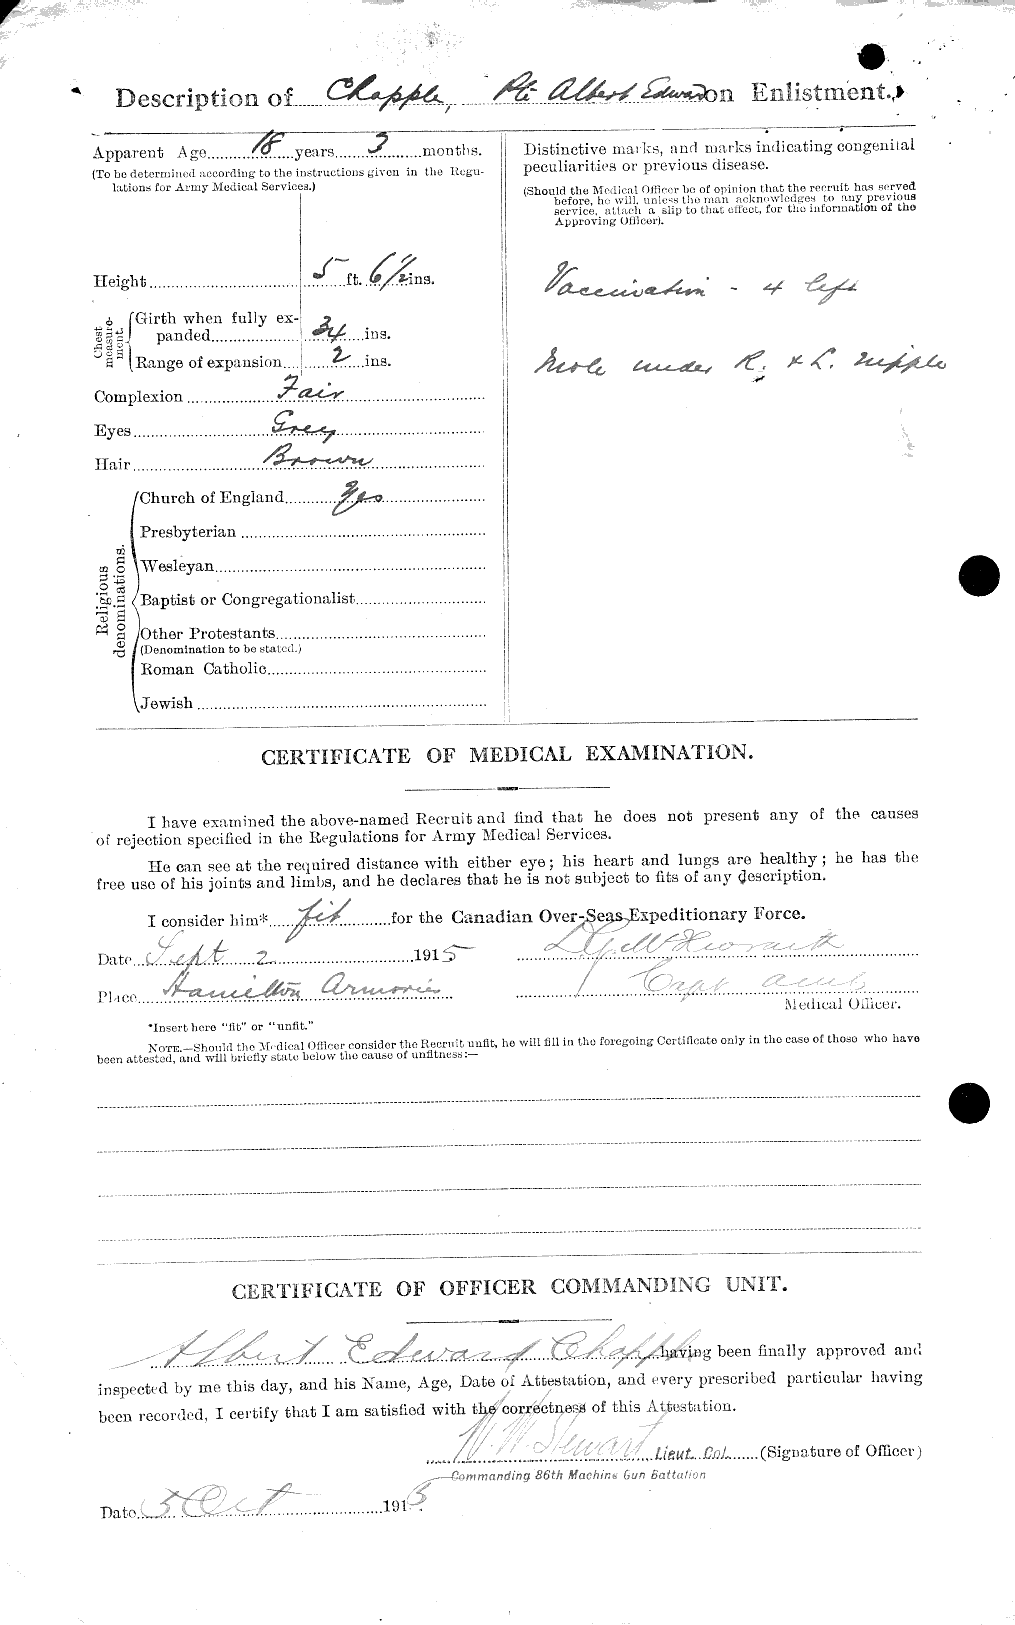 Personnel Records of the First World War - CEF 015010b